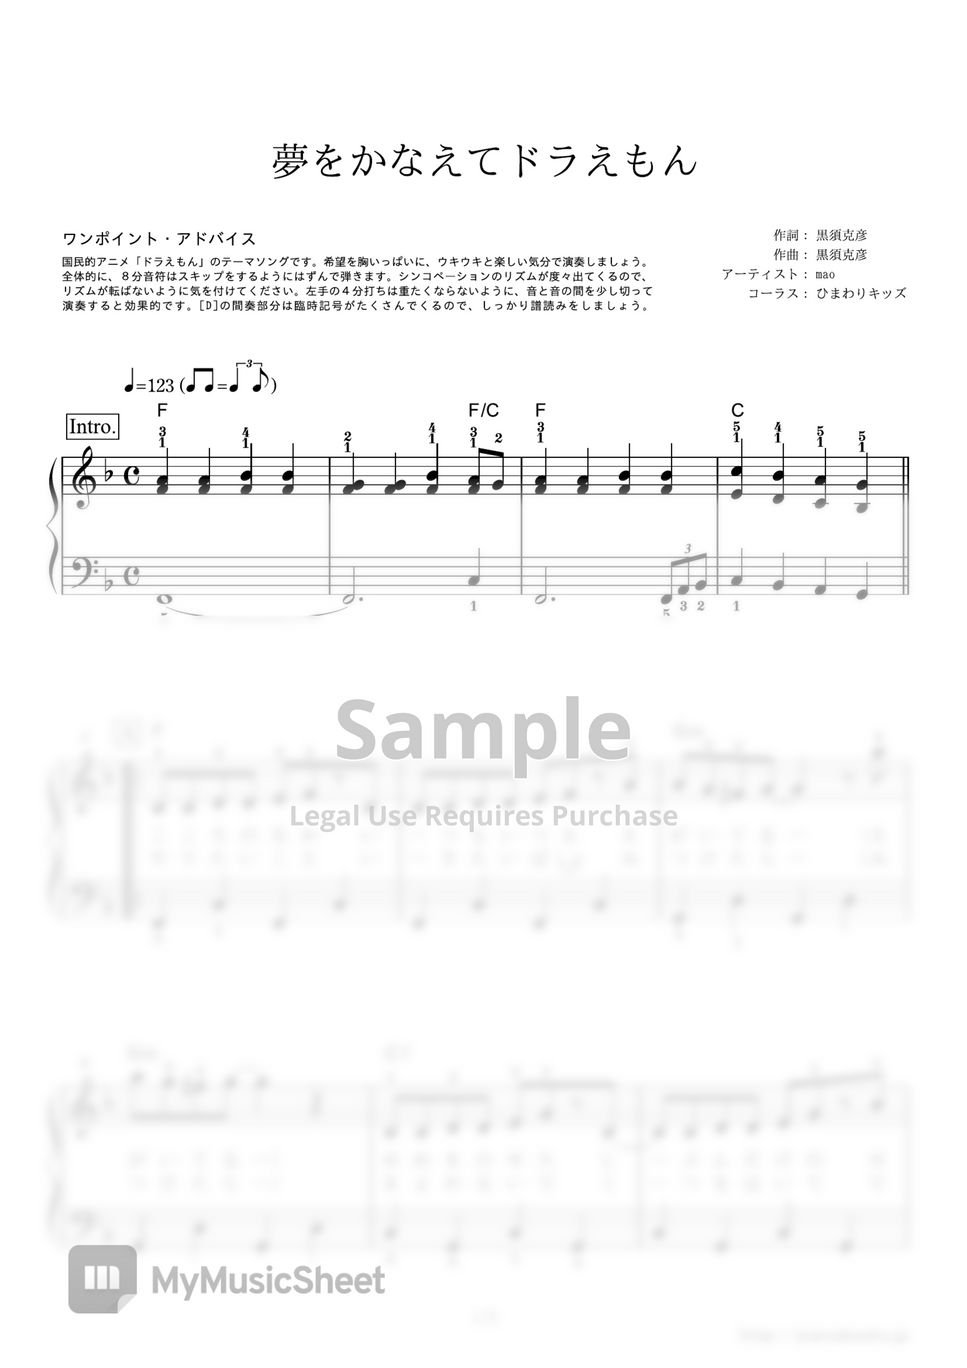 mao - Yume wo Kanaete Doraemon (Opening theme song from anime 『Doraemon-Gadget Cat from the Future』) by PianoBooks